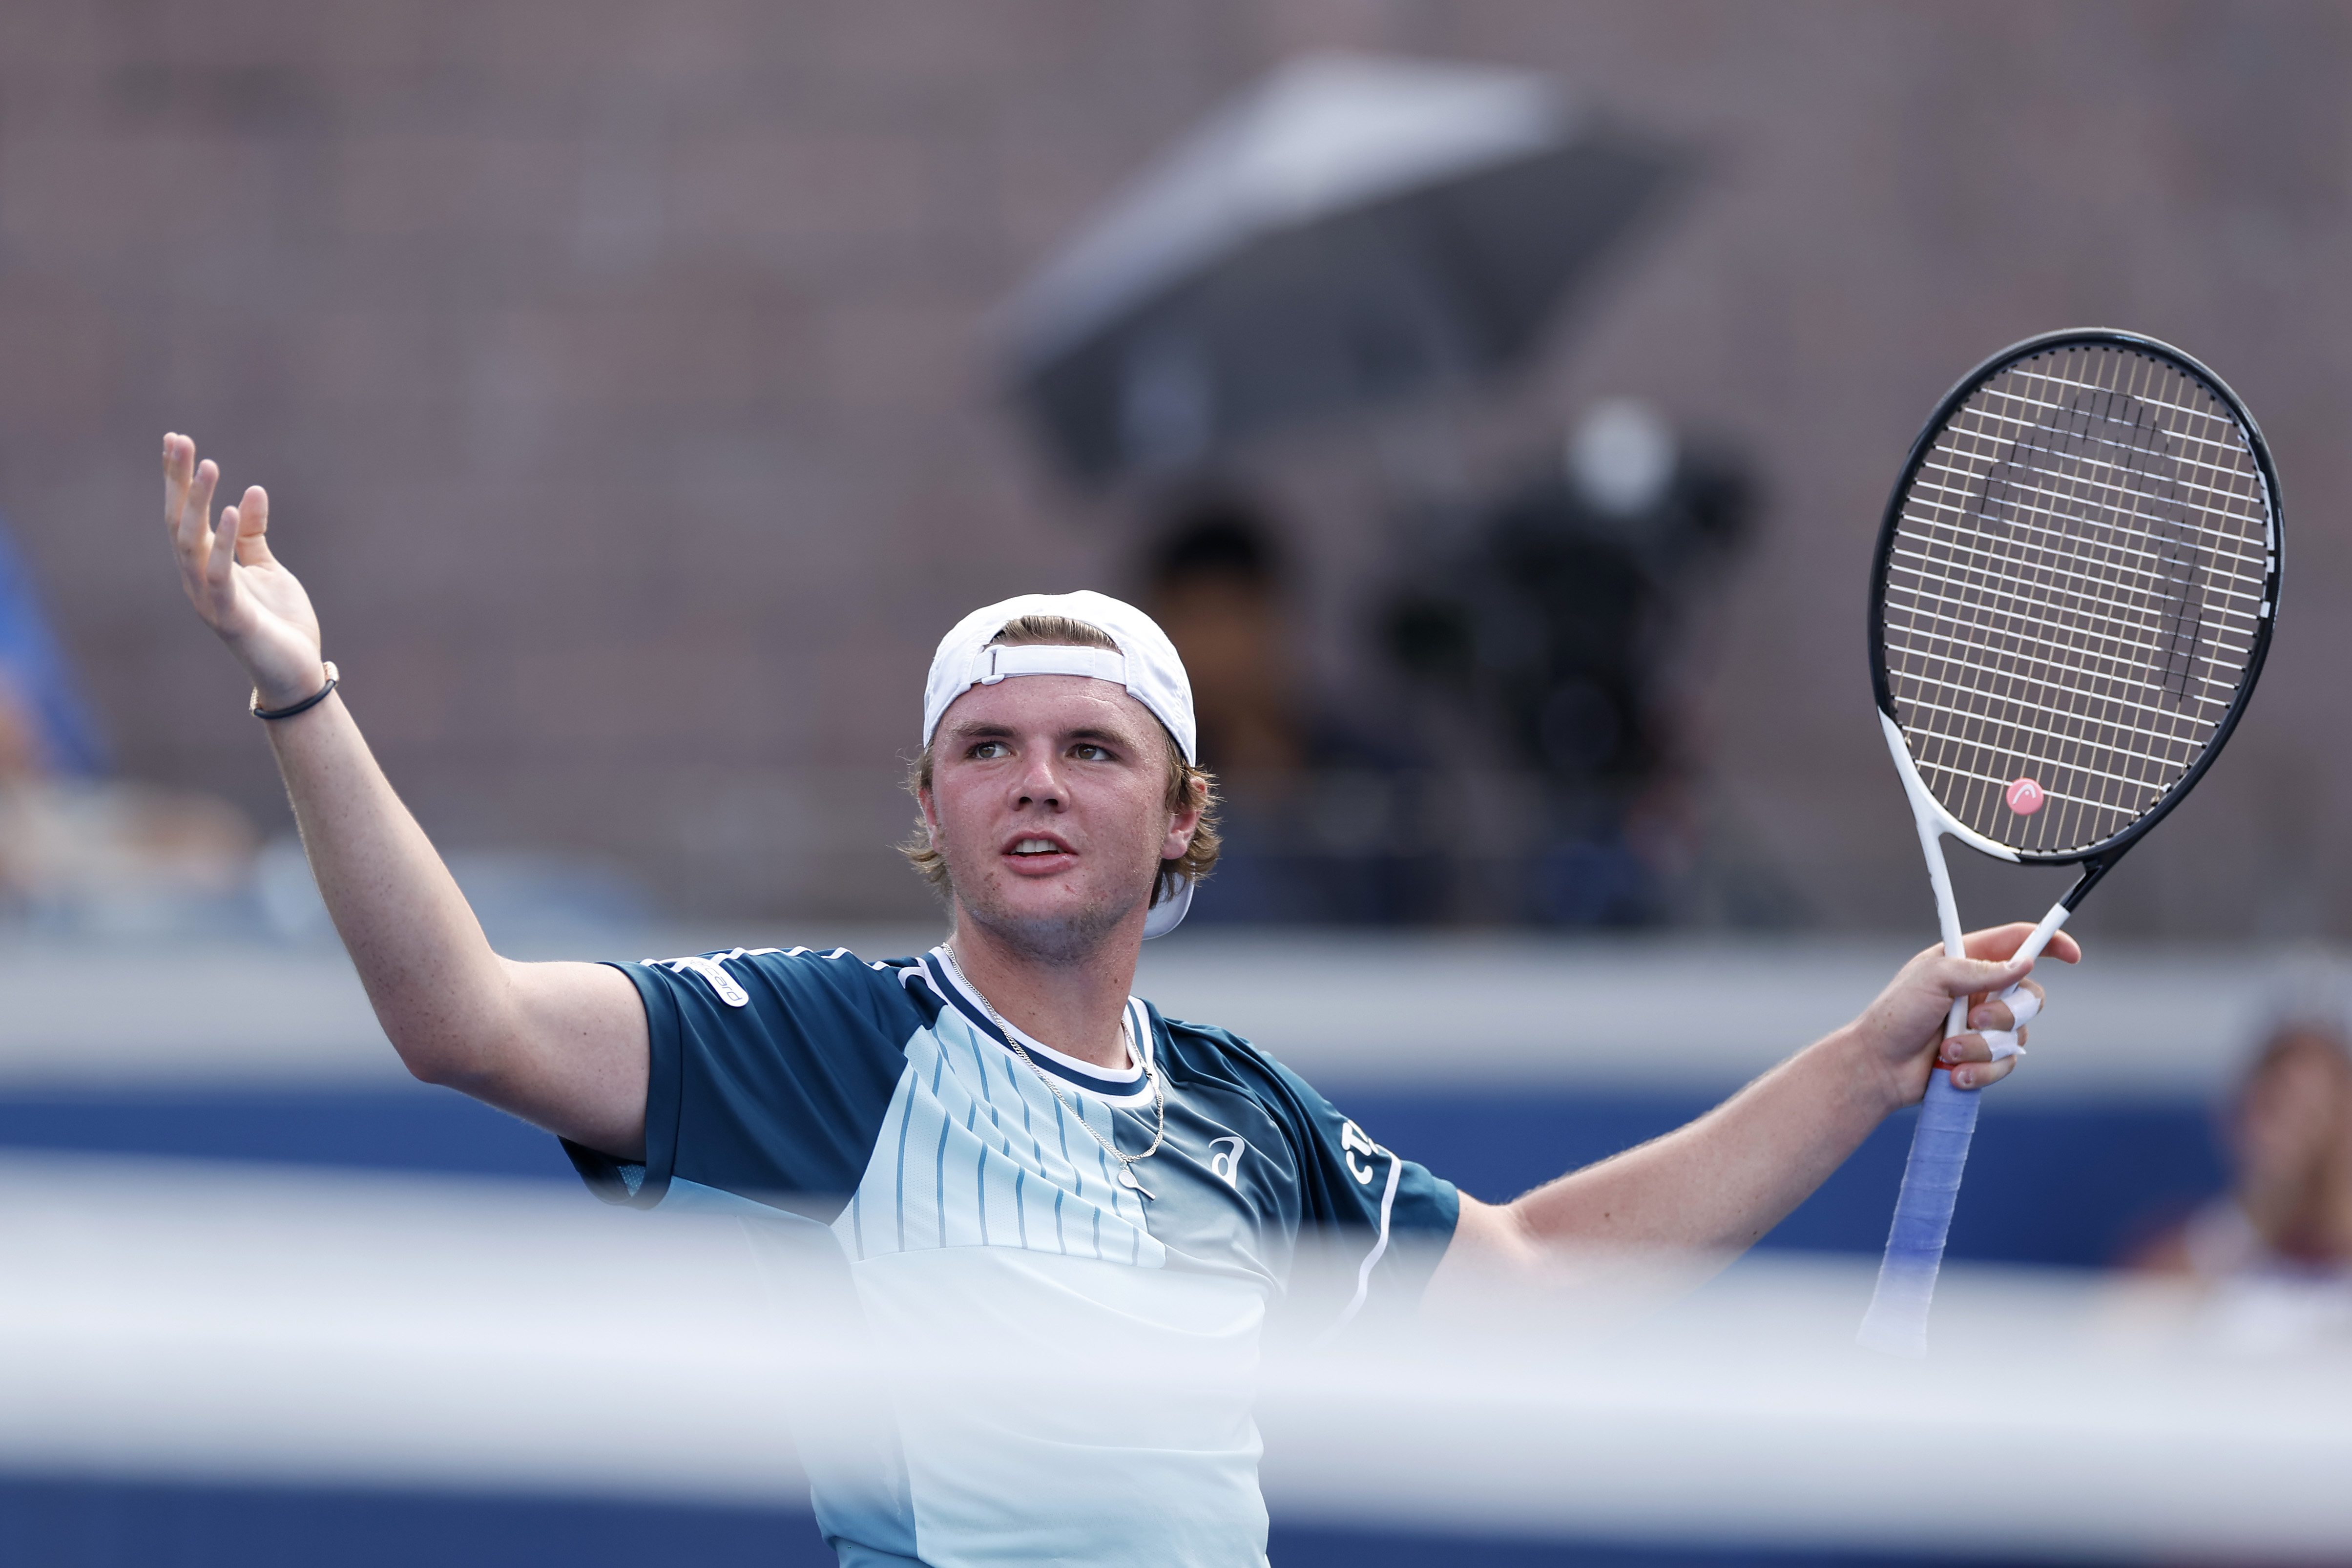 Qualifier Dominic Stricker ousts Stefanos Tsitsipas at US Open for maiden Top 10 win